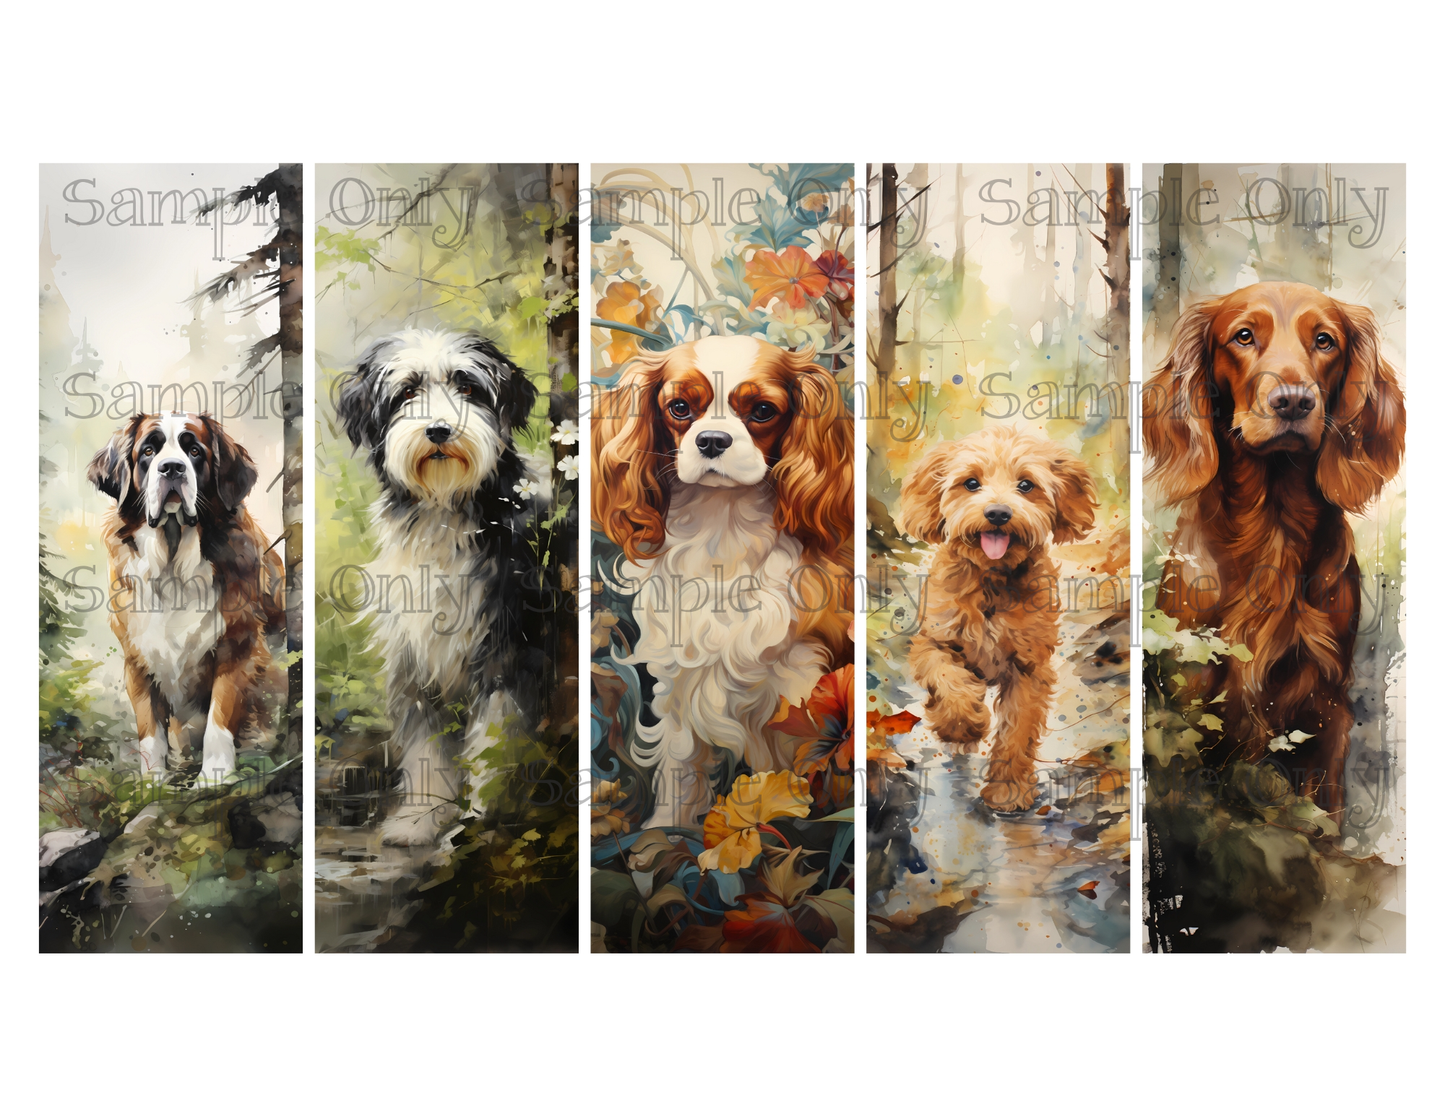 Assorted Dogs Bookmark Set 02 Printed Water Soluble Image Transfer Sheet For Polymer Clay